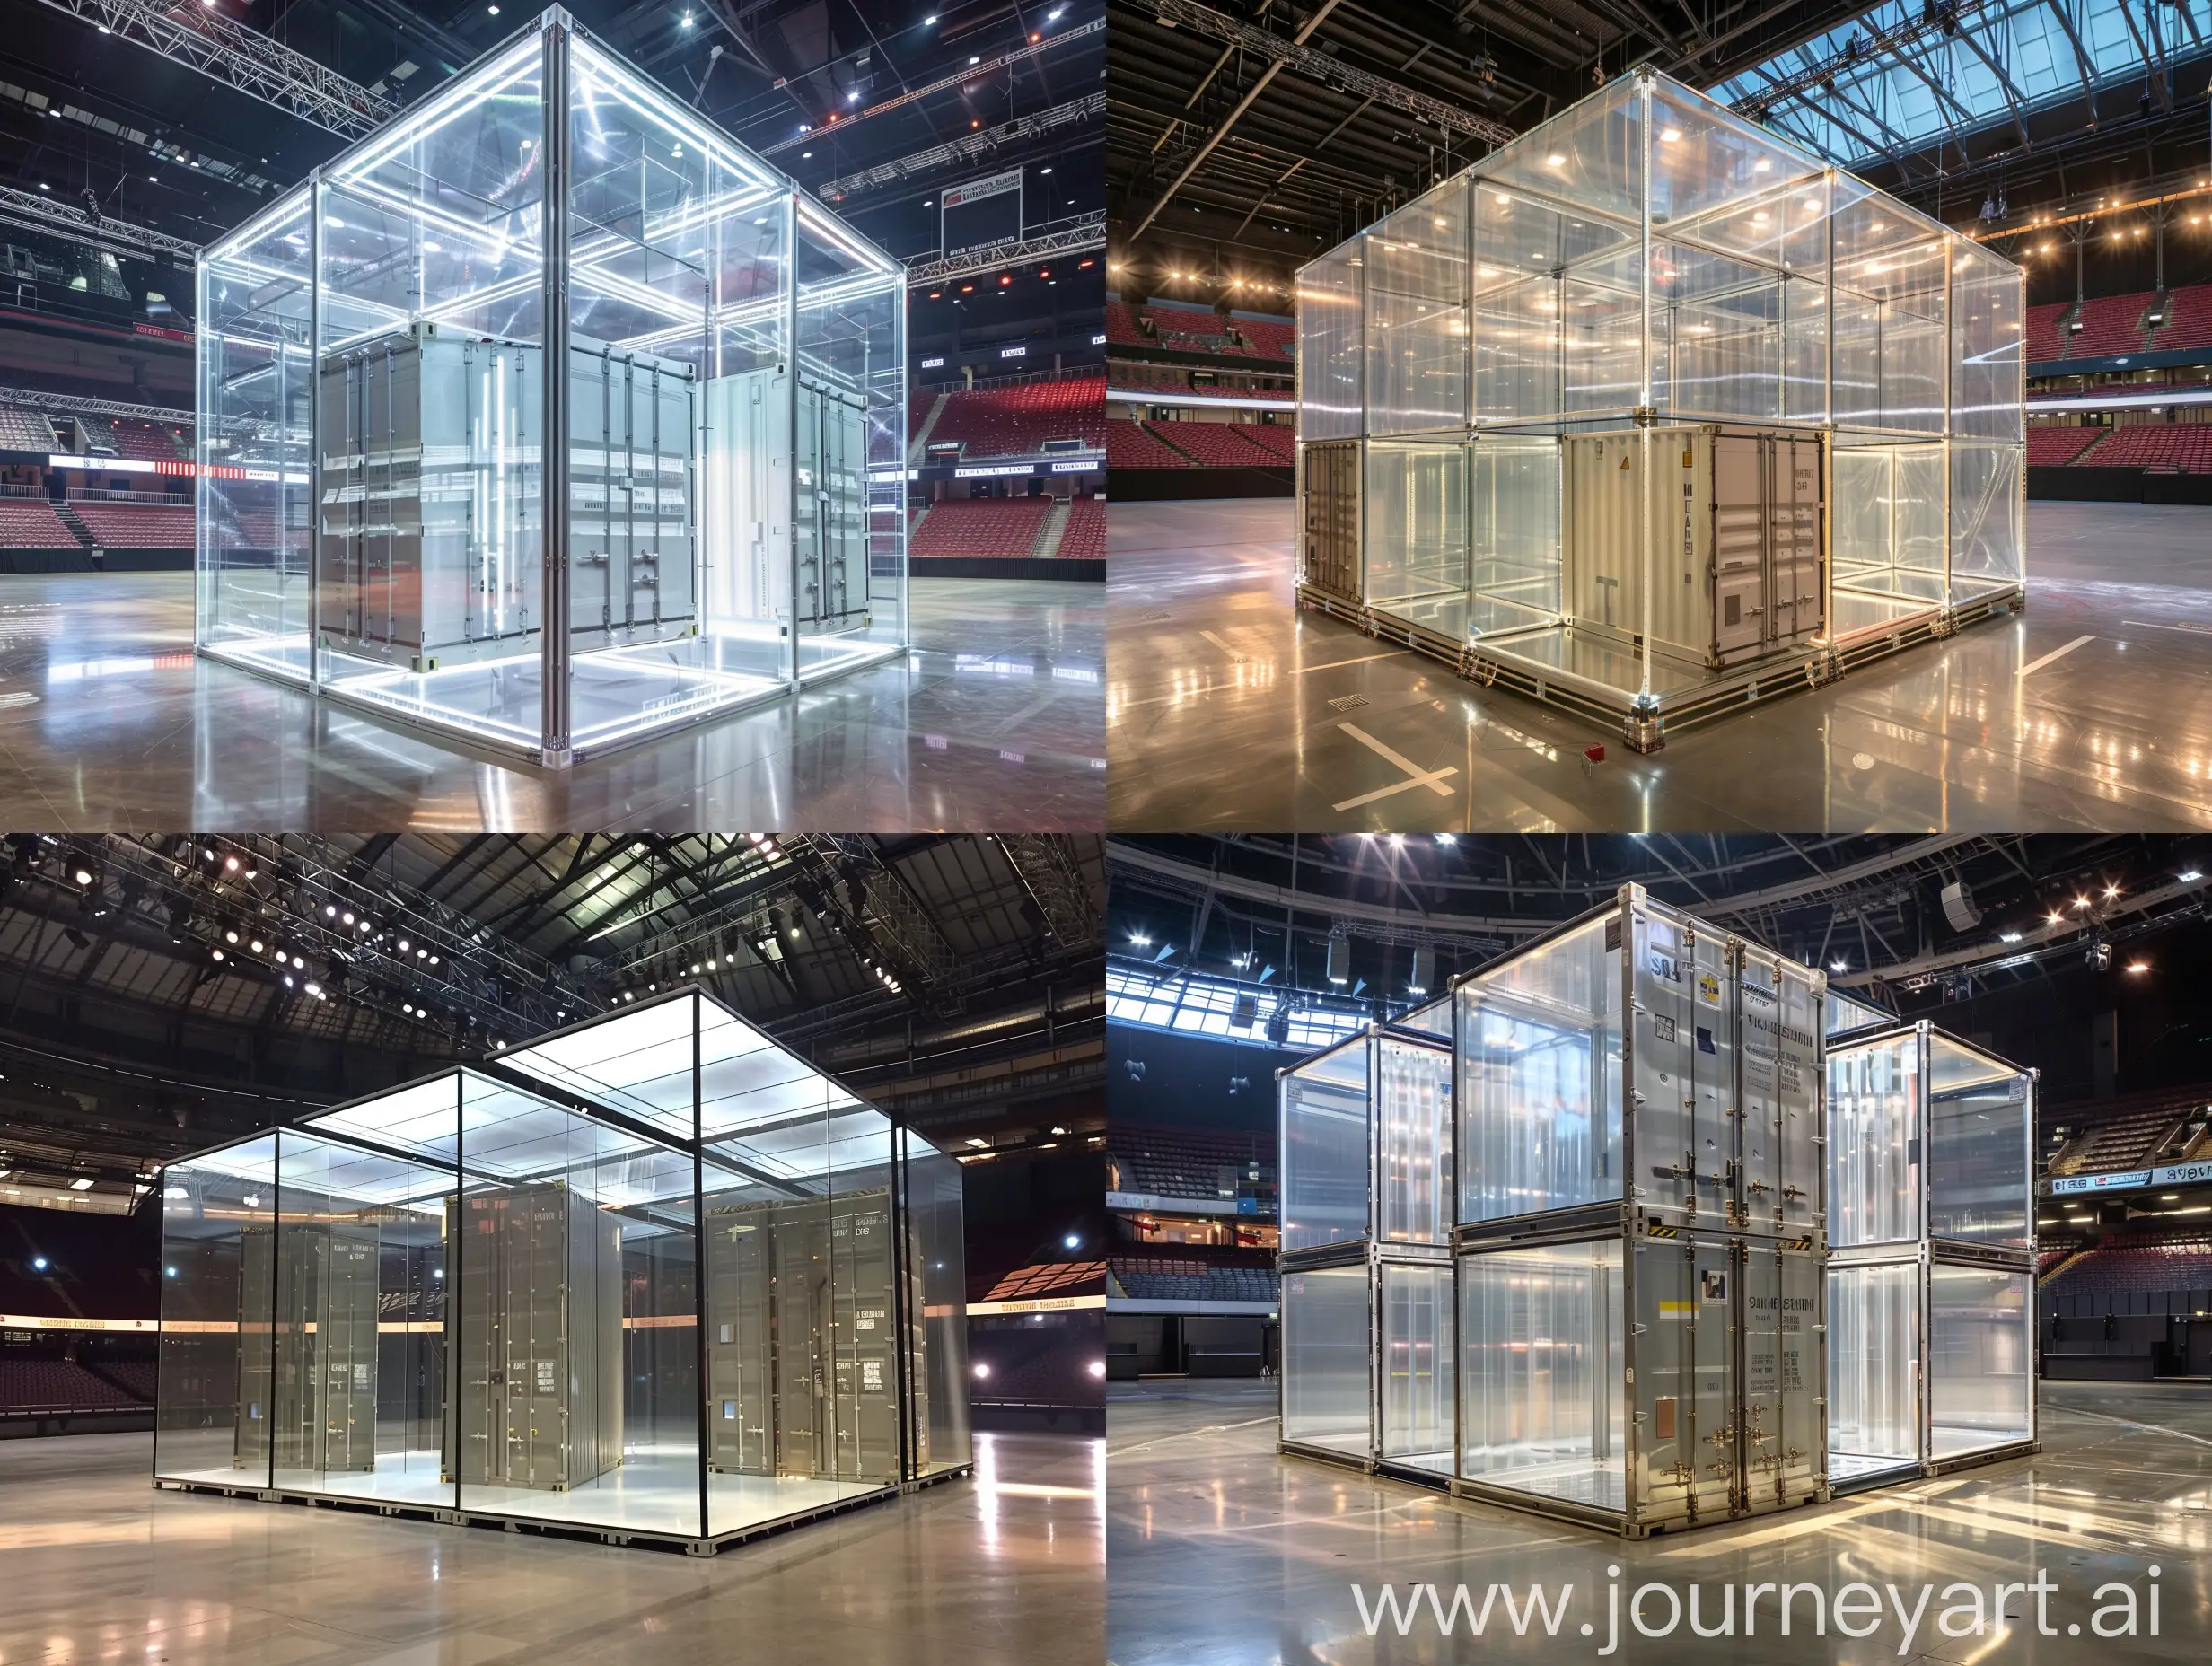 Seen inside the Manchester Arena is a fourteen meter by fourteen meter translucent mirrored cube, inside the cube are three twelve meter long by 2.4 meter high shipping containers, the containers are stacked one on top of the other and rotated by 90 degrees on the horizontal plane, each container has glass doors at each end